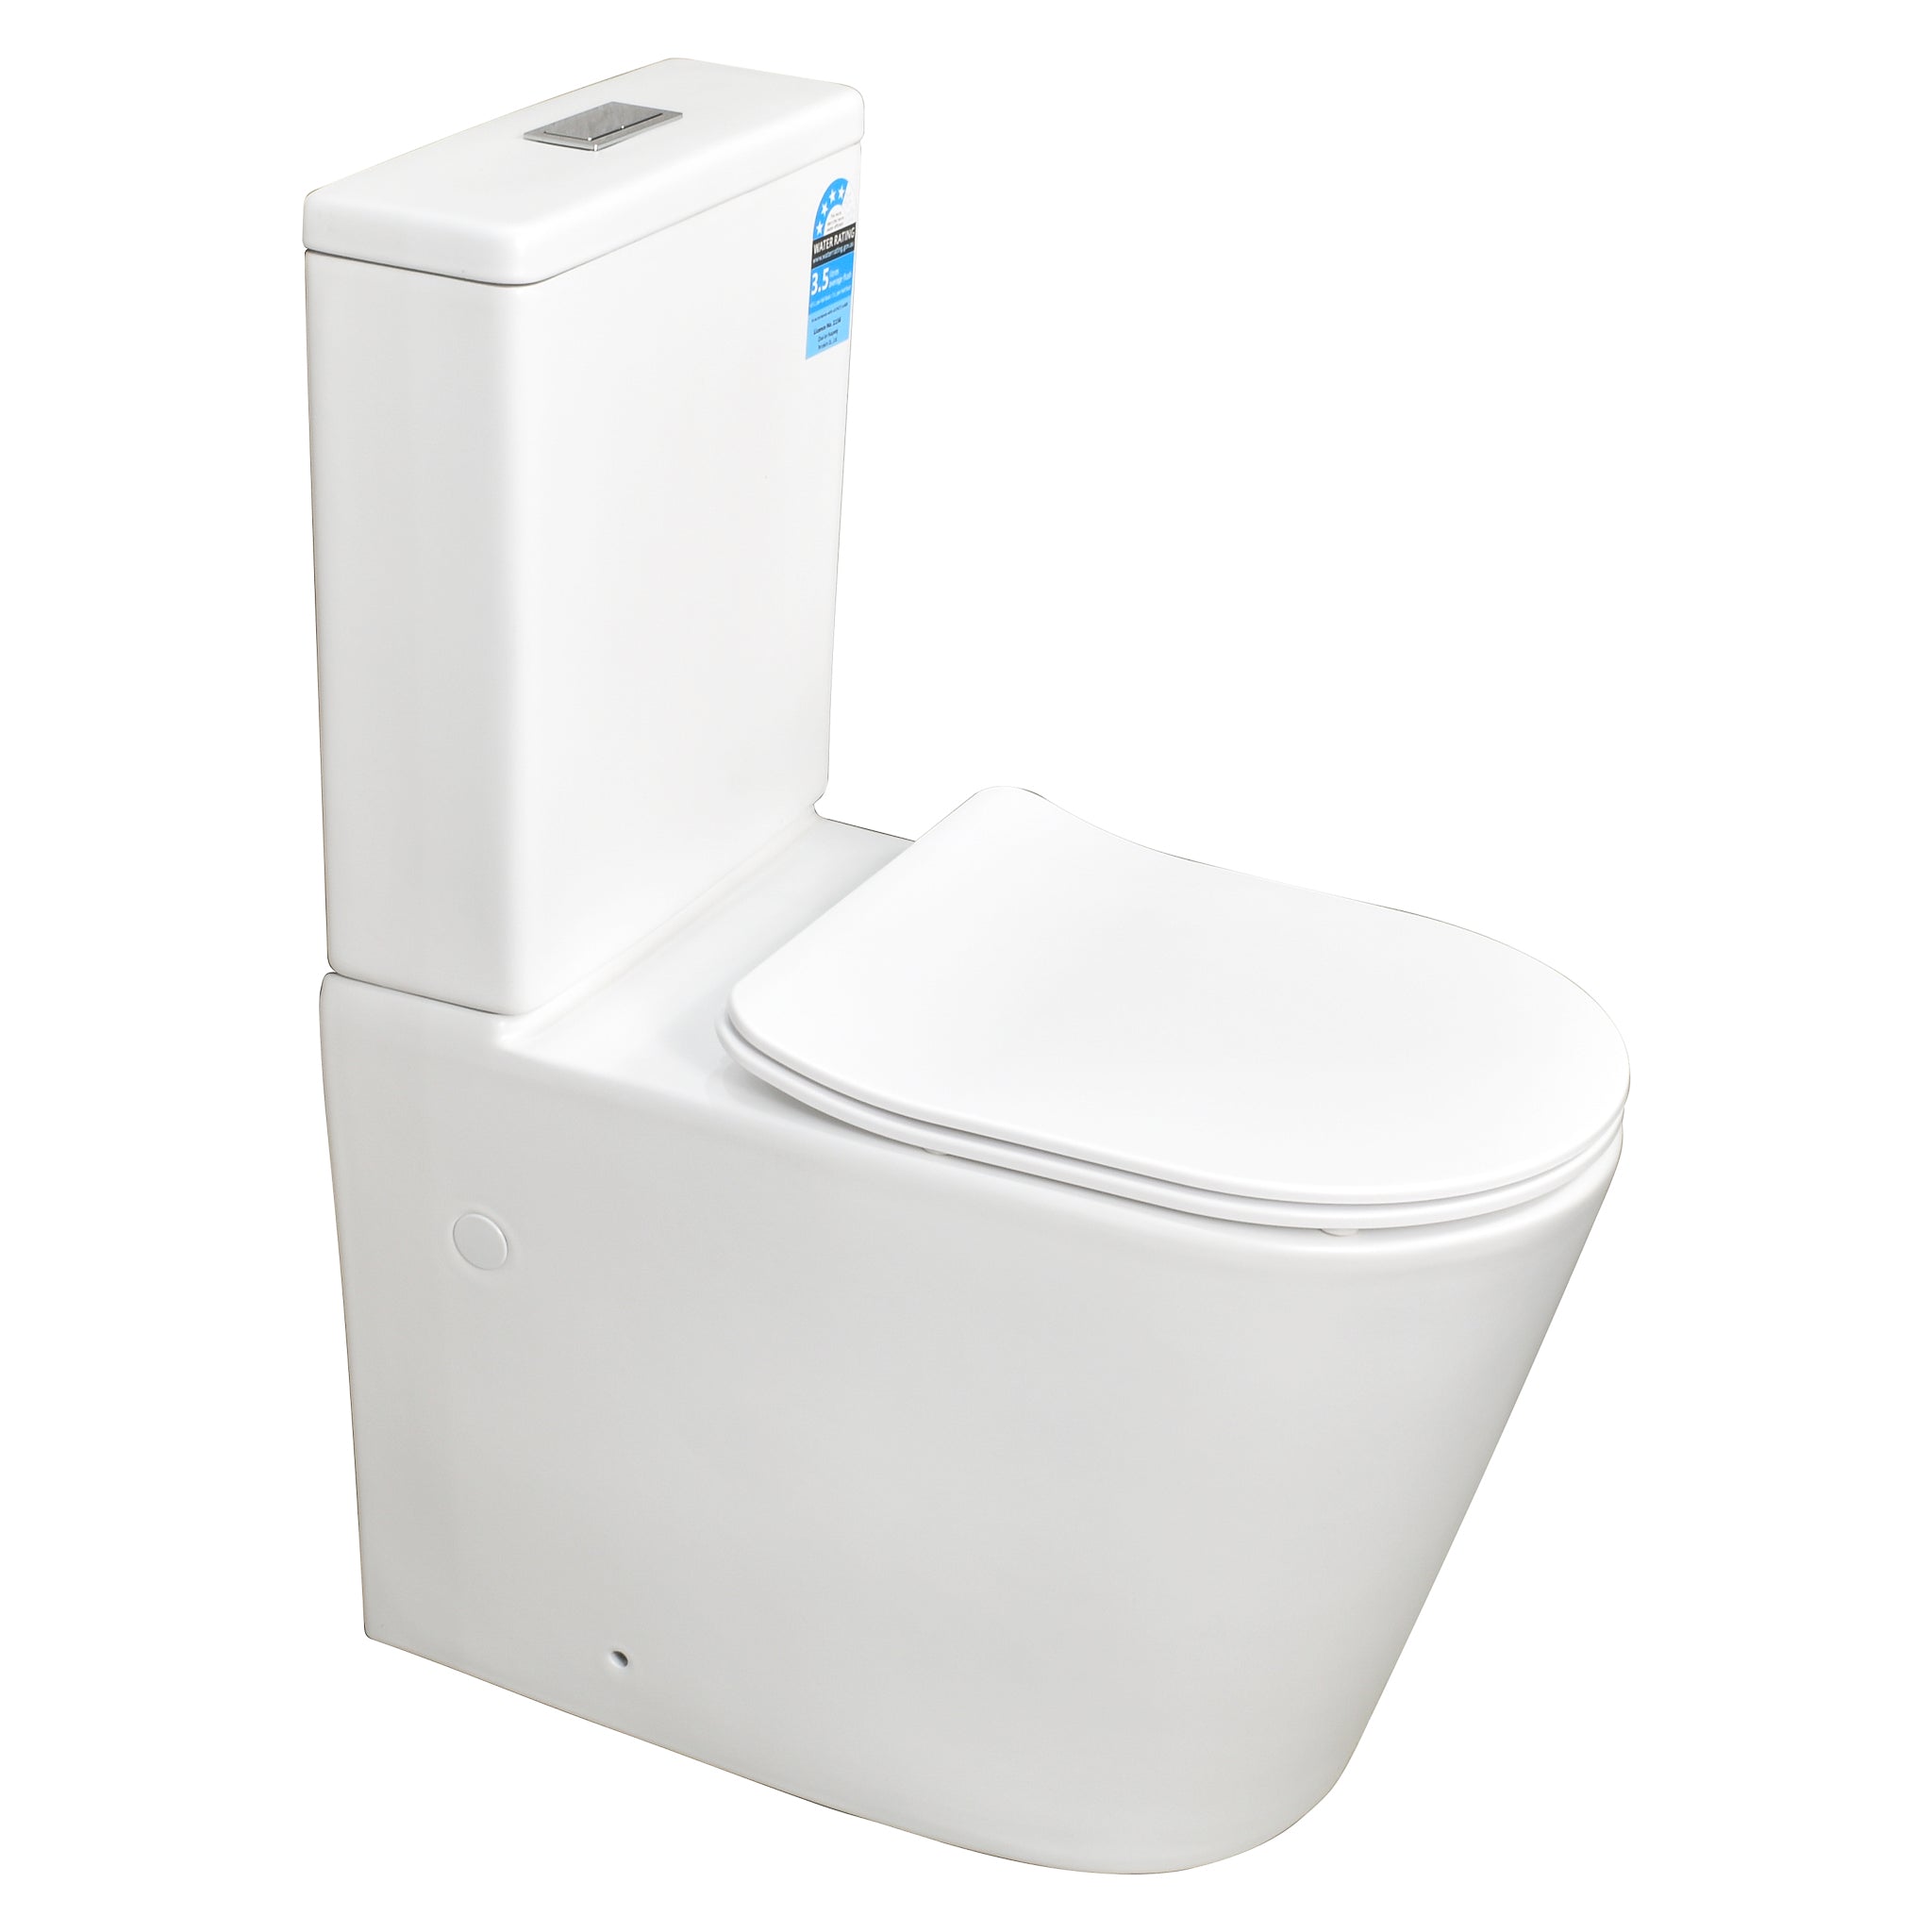 https://cdn.shopify.com/s/files/1/0251/6513/5960/products/Tiffalo-Rimless-Back-to-Wall-Toilet-Suite-MatteWhite.jpg?v=1674103598